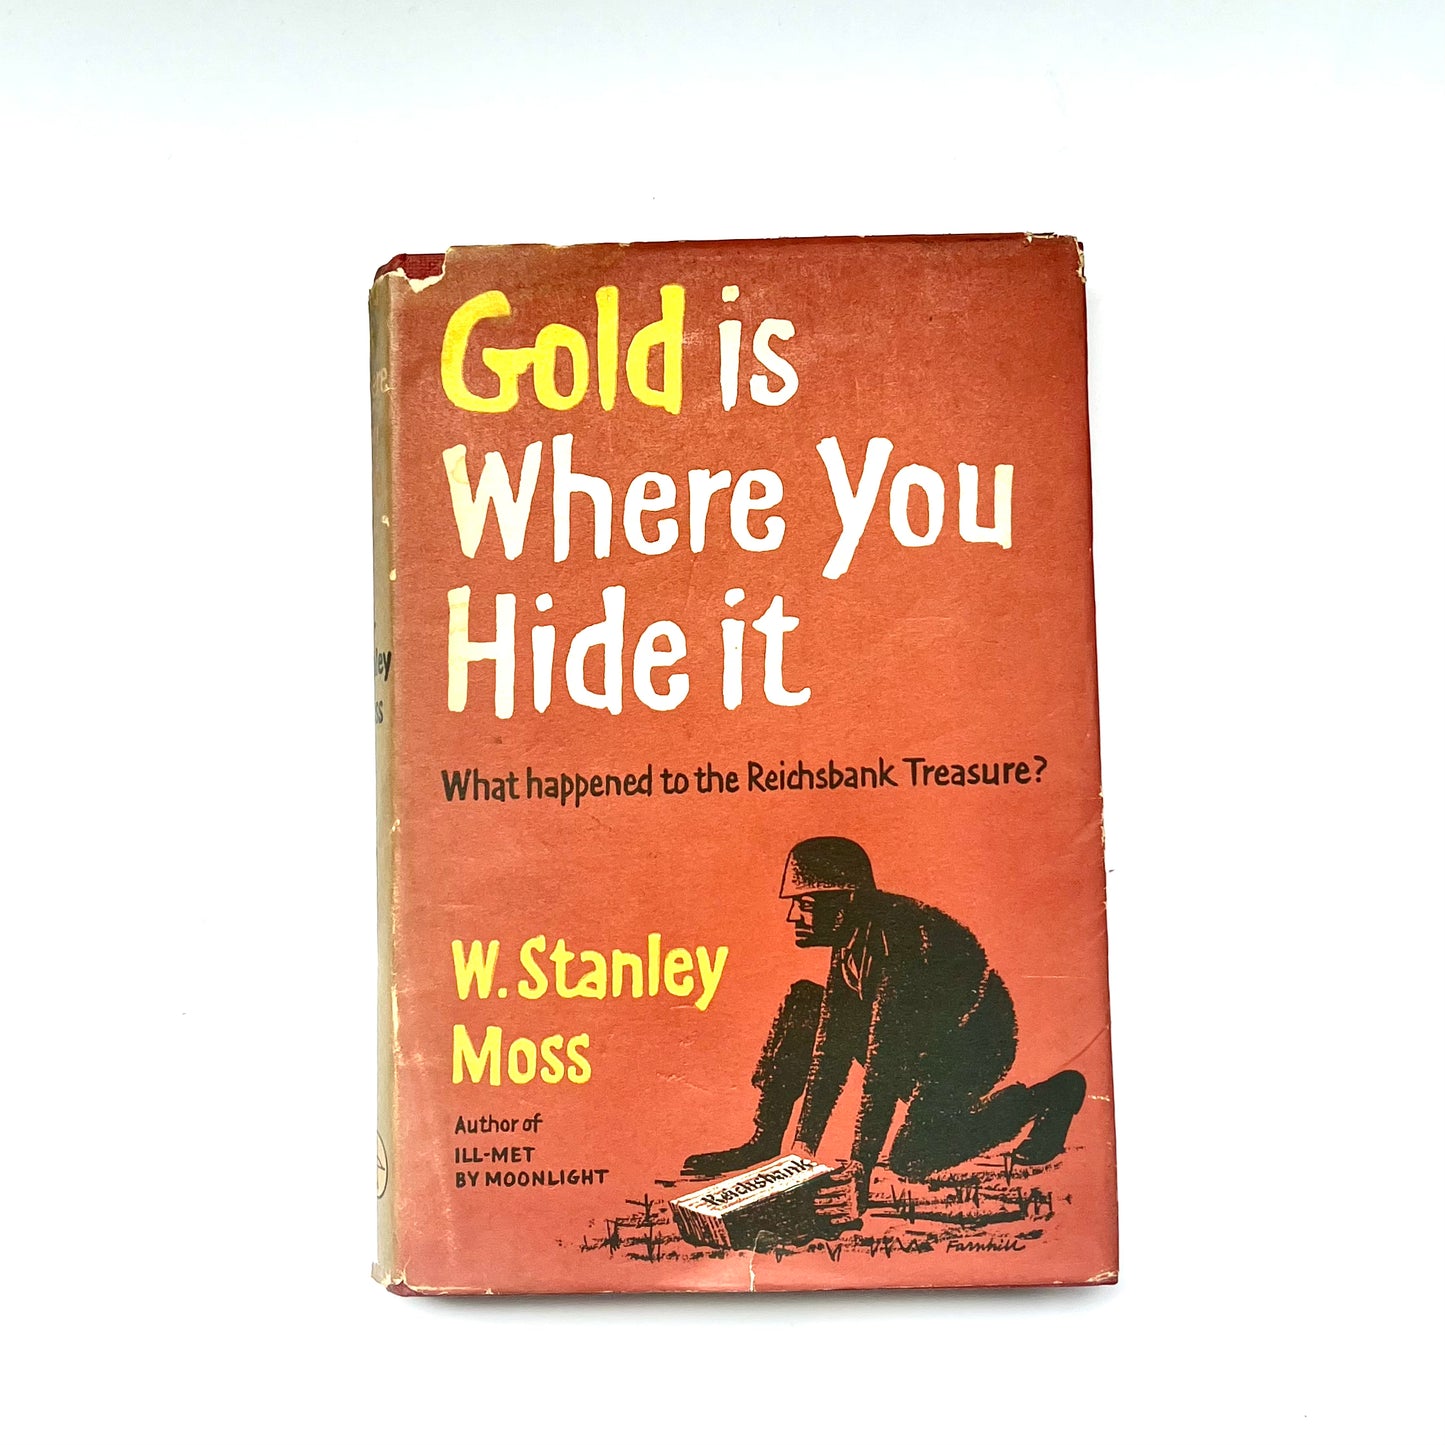 First edition of Gold Is where You Hide It By W. Stanley Moss circa 1956, post World War Two Memoir